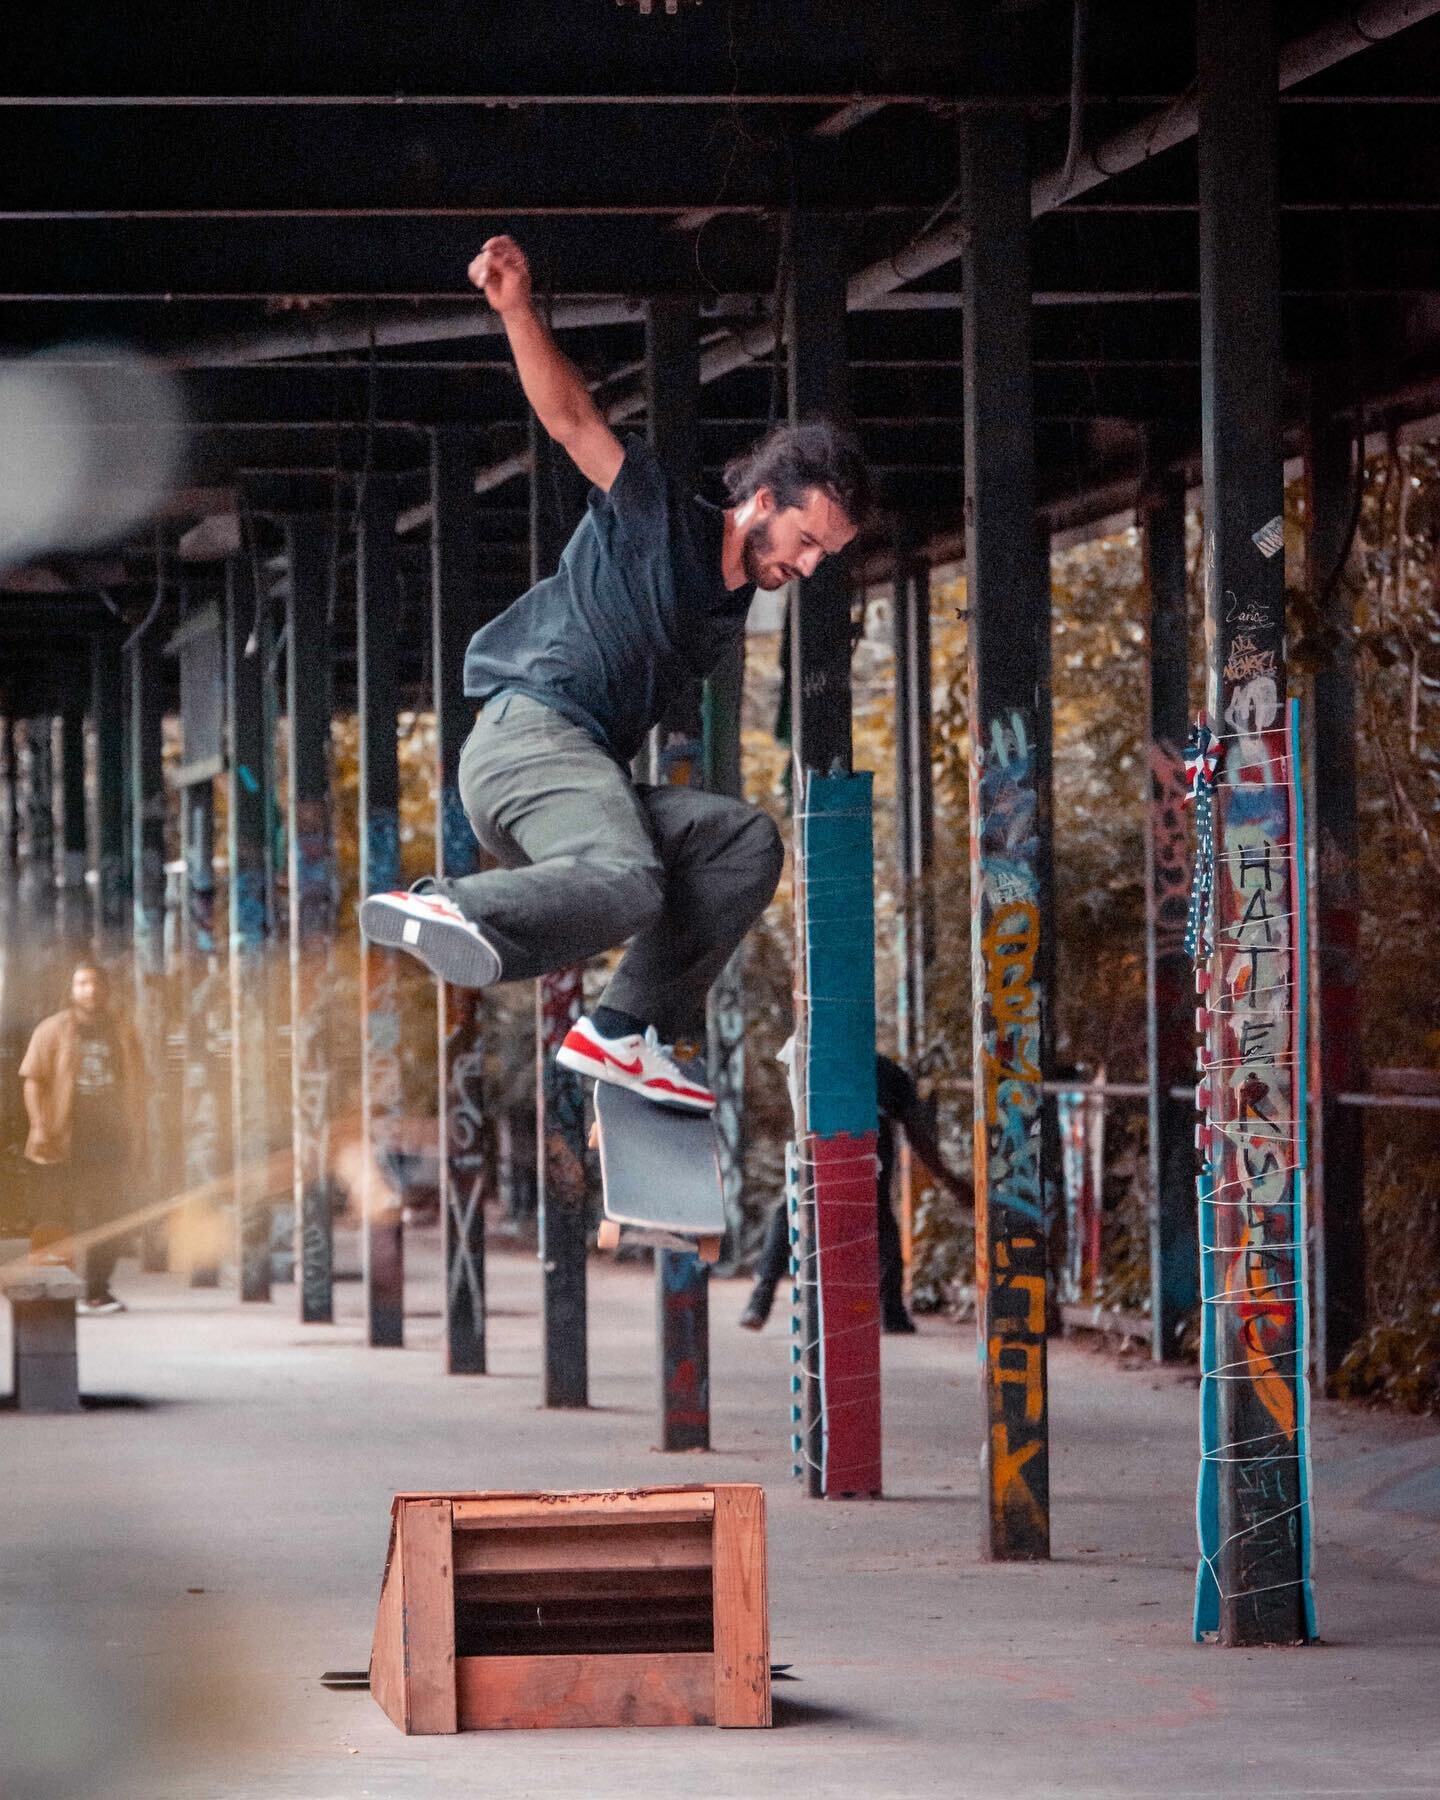 It&rsquo;s been years since I&rsquo;ve gotten to see @antoniodurao skate in person, but it is always a pleasure. Dude constantly kills everything, and his pop is insane. Glad I got to capture some shots while he was at the Range #skatediy
.
.
.
I lov